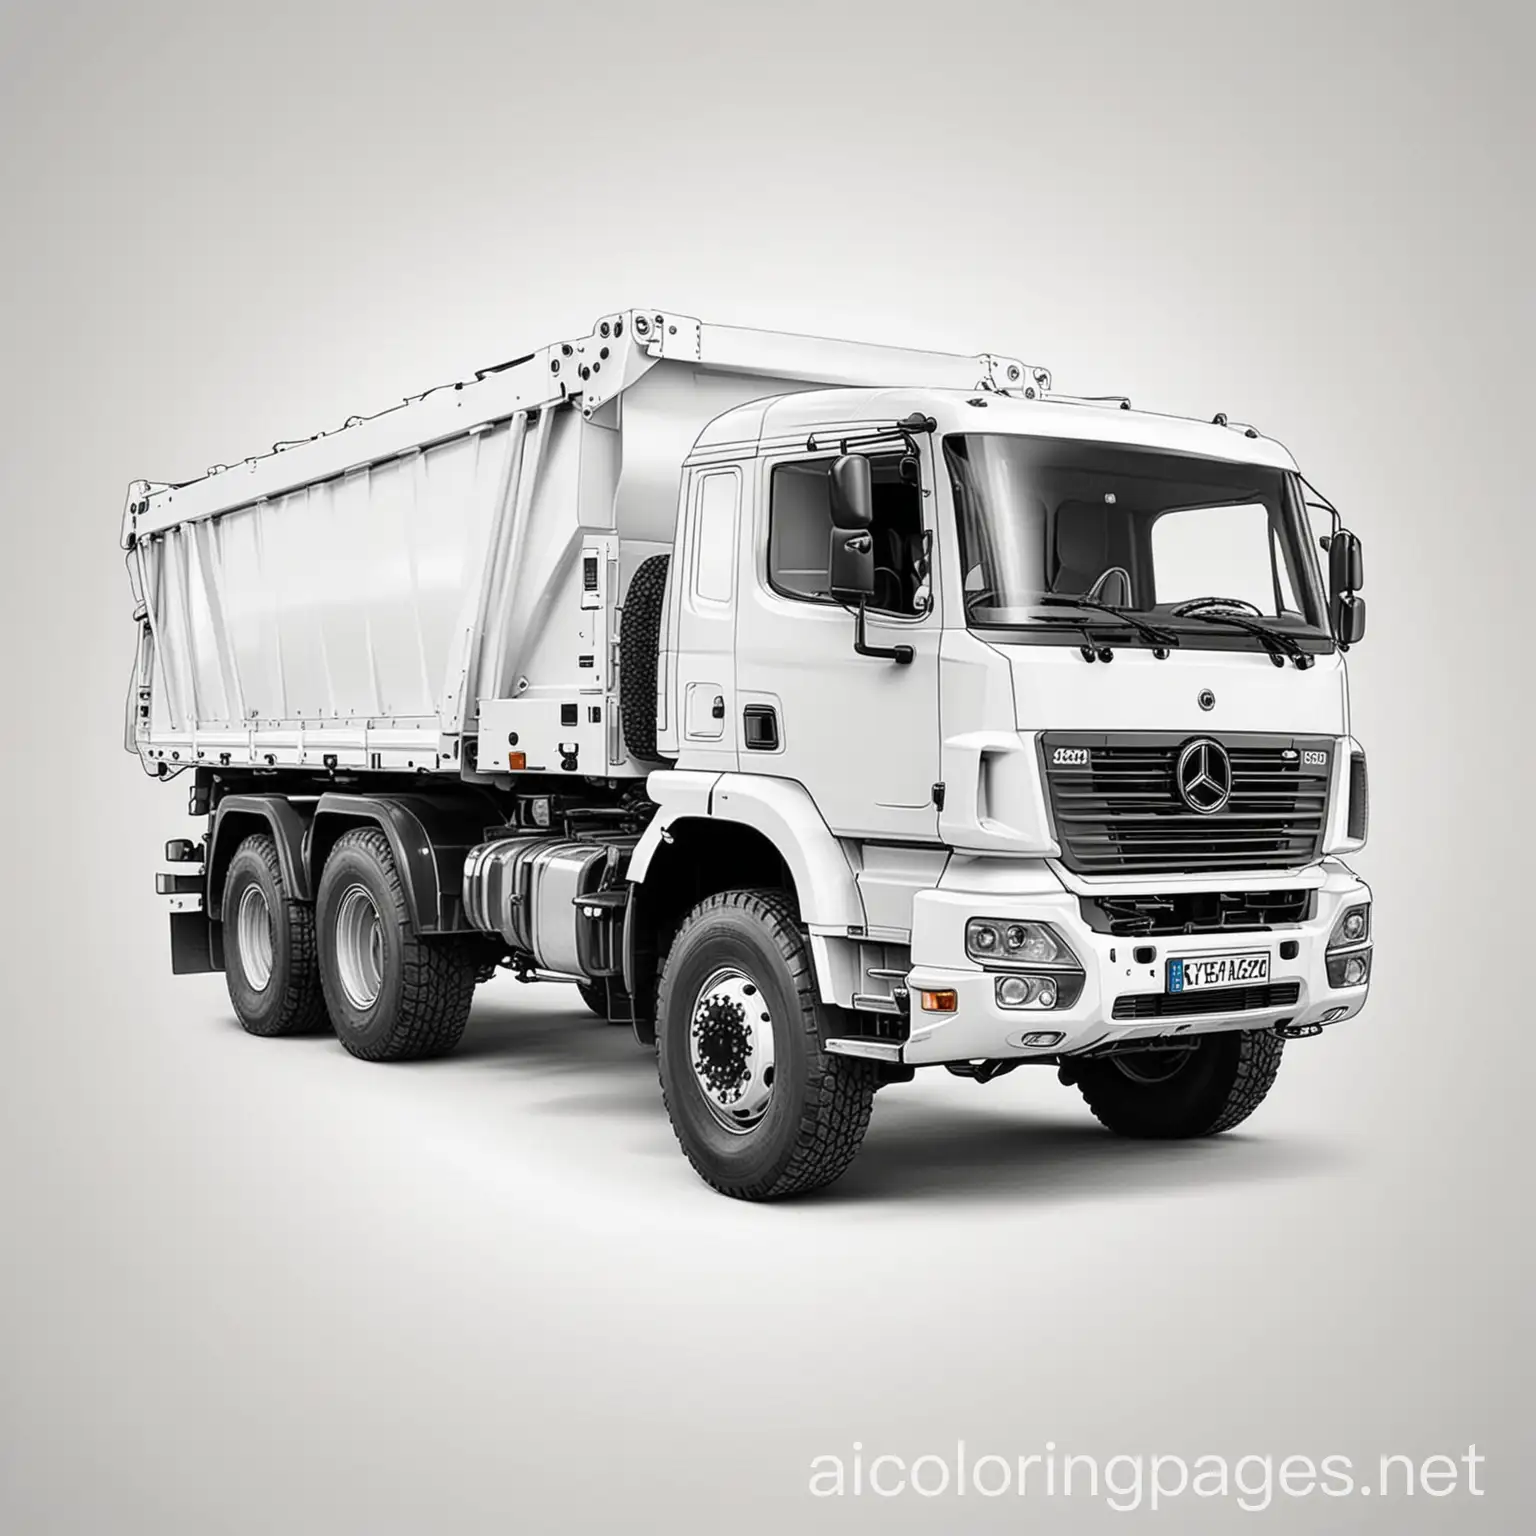 German-THW-Truck-Coloring-Page-Line-Art-on-White-Background